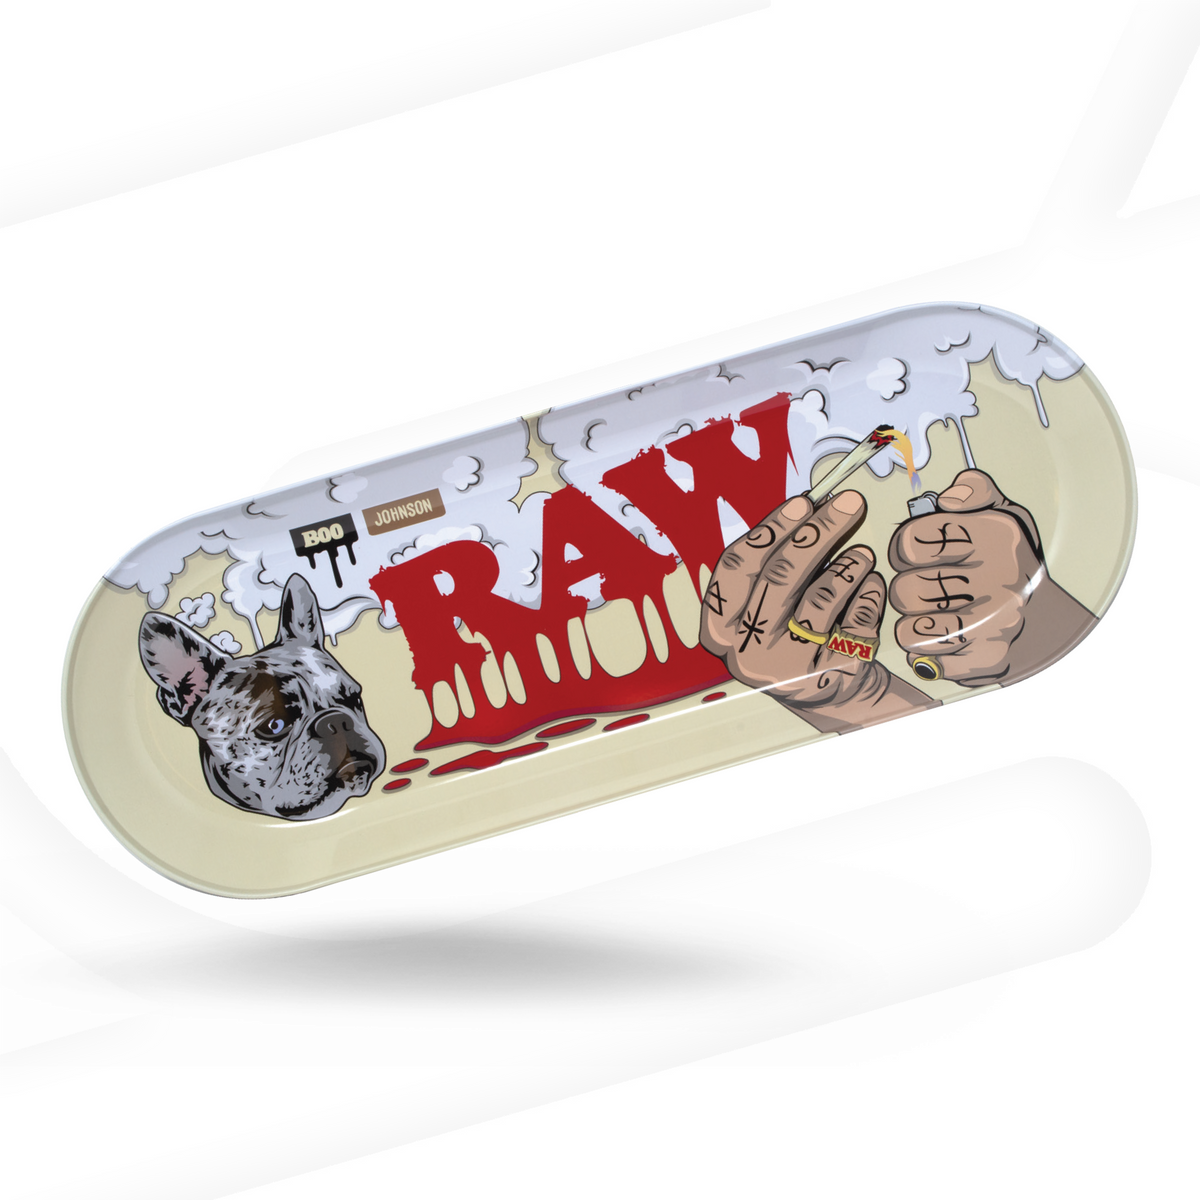 RAW X Boo Johnson Skate Deck Rolling Tray Rolling Trays WAR00170-MUSA01 esd-official